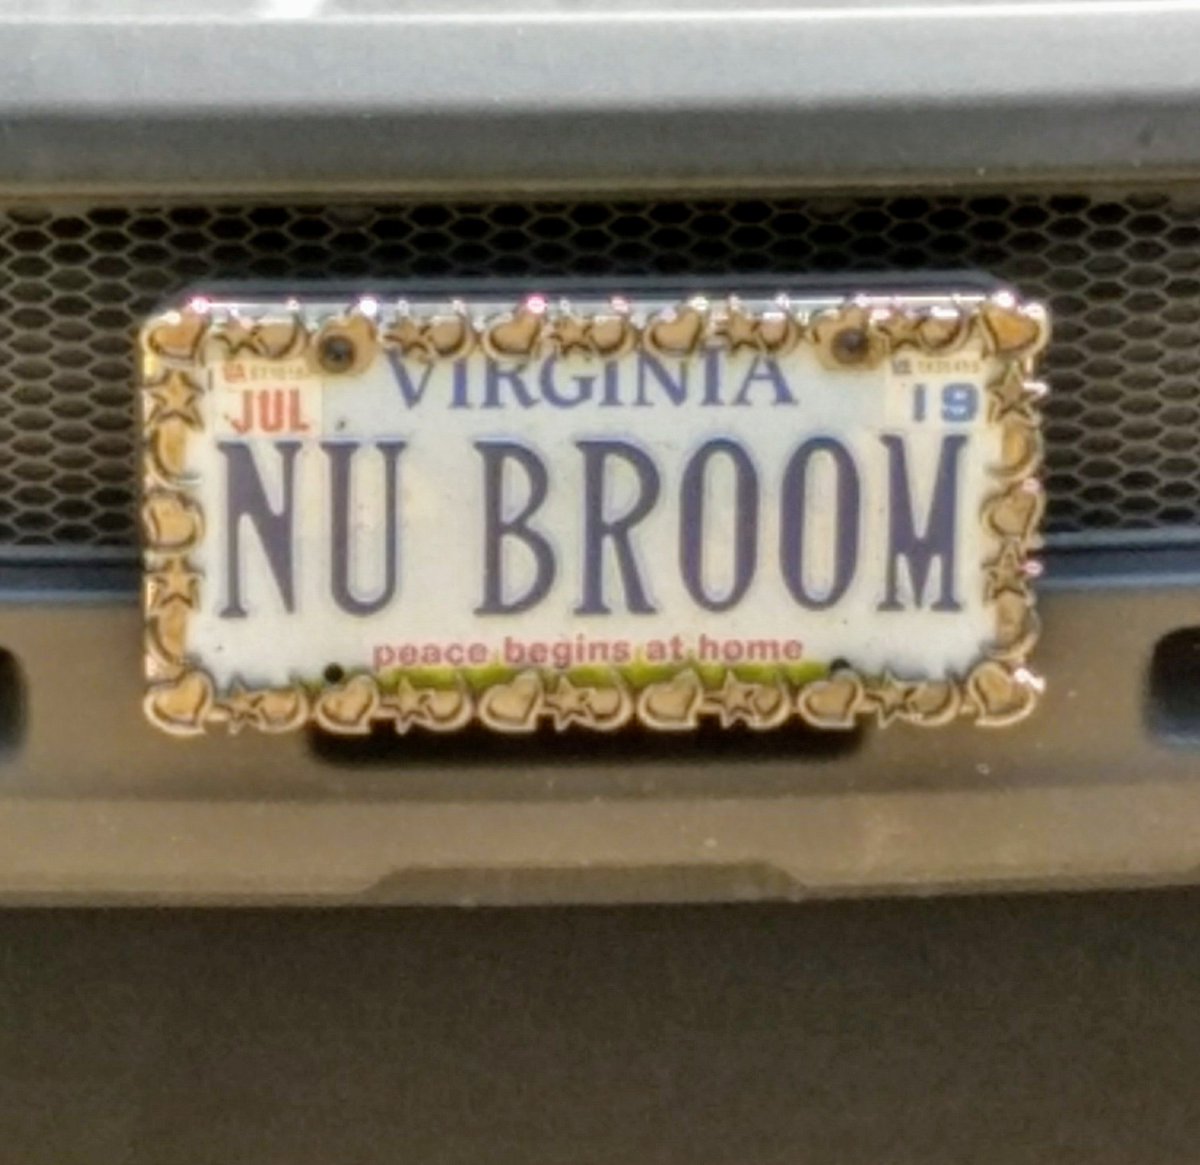 In support of @AllSoulsCon I thought I'd share my license plate, an omage to my favorite book trilogy and it's author. @DebHarkness @ADiscoveryOfWTV #ADiscoveryOfWitches #AllSoulsCon  #matthewclairmont #sarahbishop